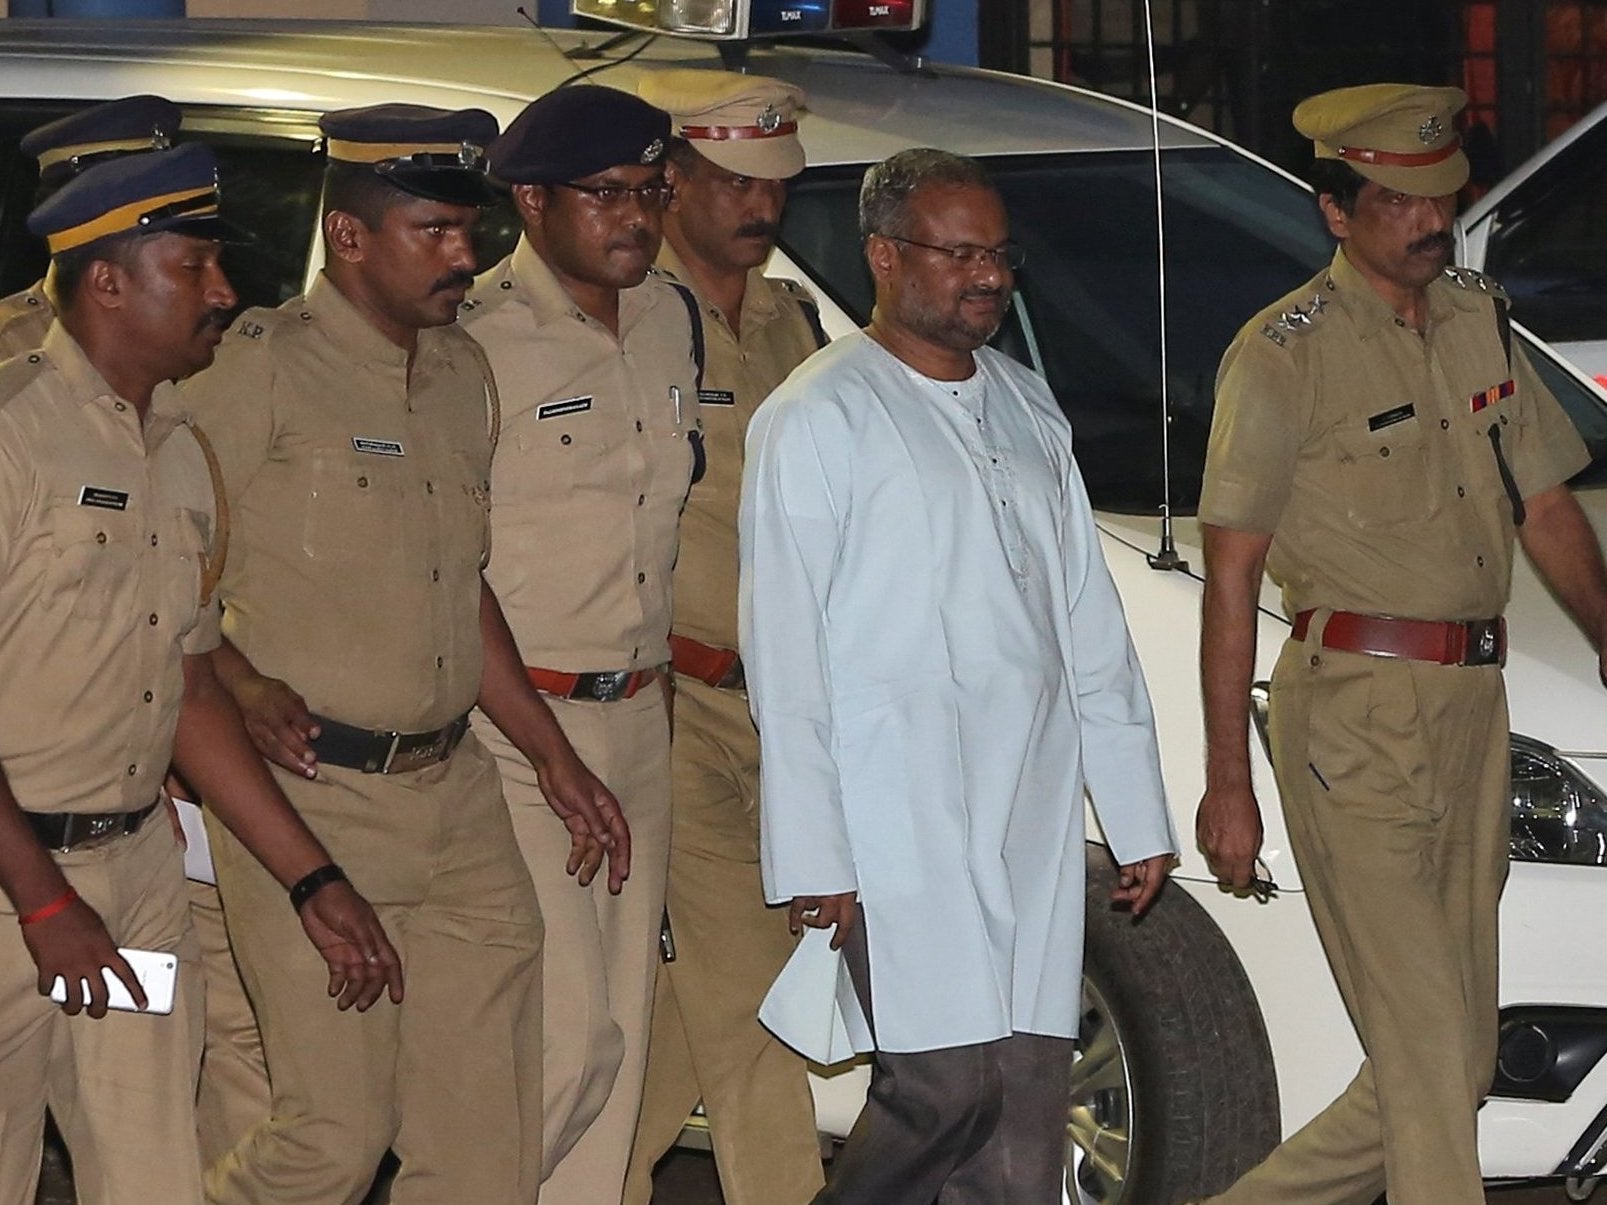 Bishop Franco Mulakkal, dressed in white, is escorted by police in Kochi, India